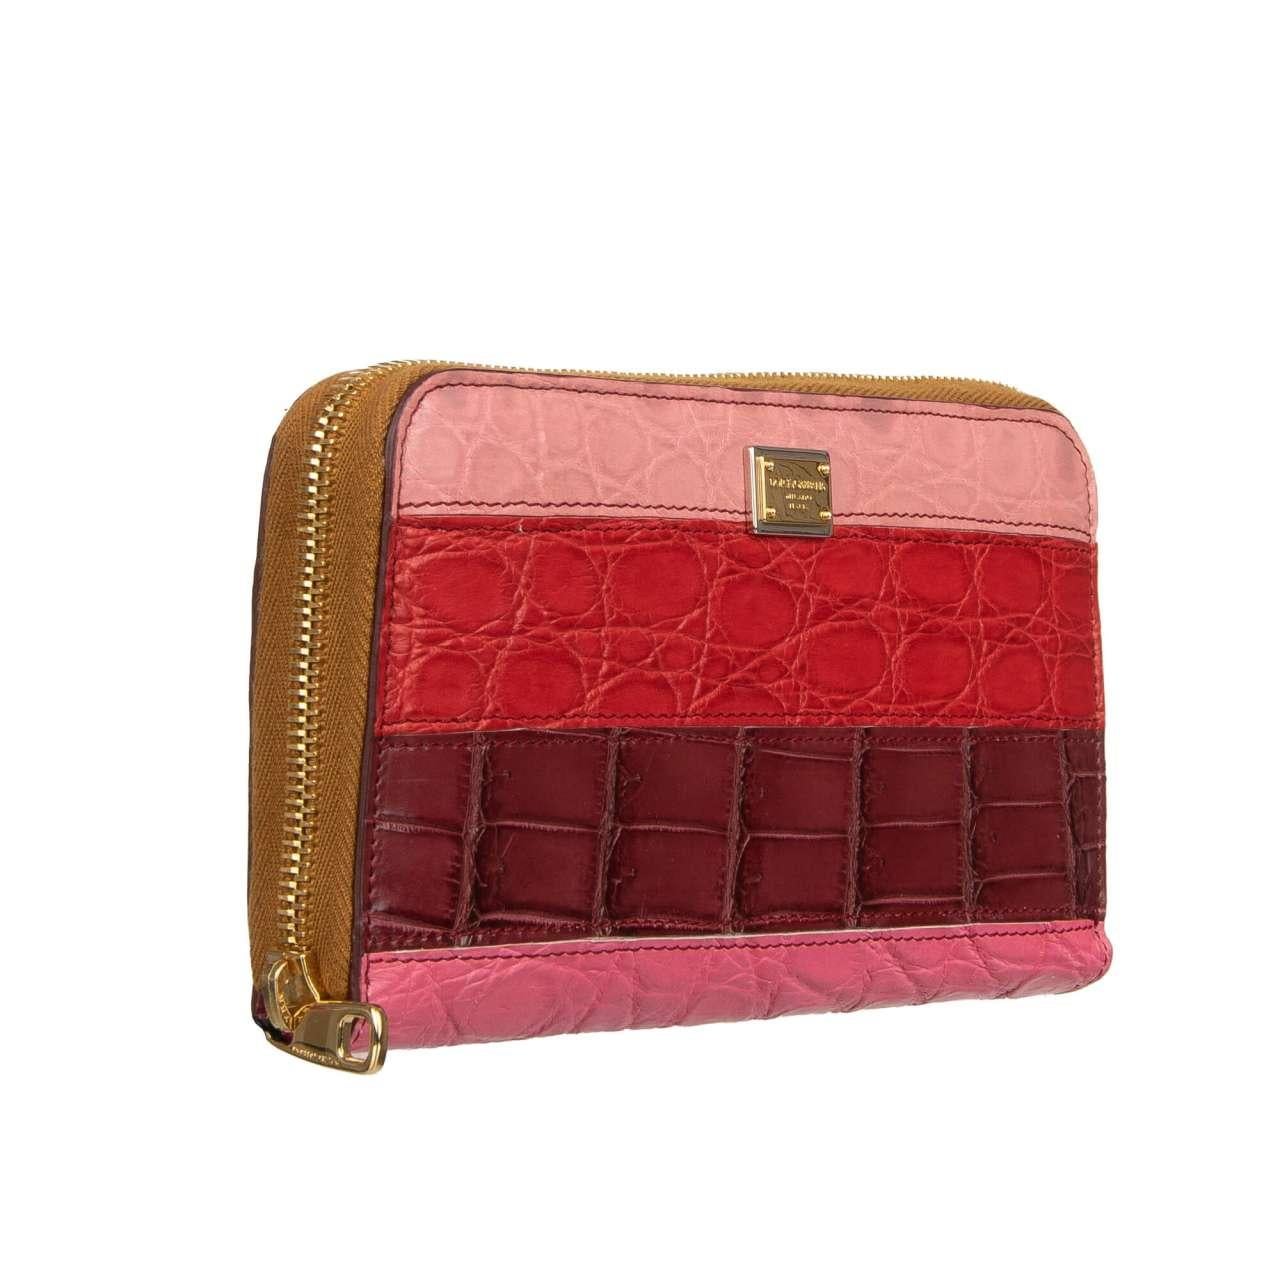 - Striped Crocodile Leather Patchwork Zip-Around wallet with logo plate in red and pink by DOLCE & GABBANA - New with Tag - MADE IN ITALY - Former RRP: EUR 2,350 - Model: BI0473-B297P-S9000 - Material: 80% Crocodile Leather (Coccodrillo), 20%